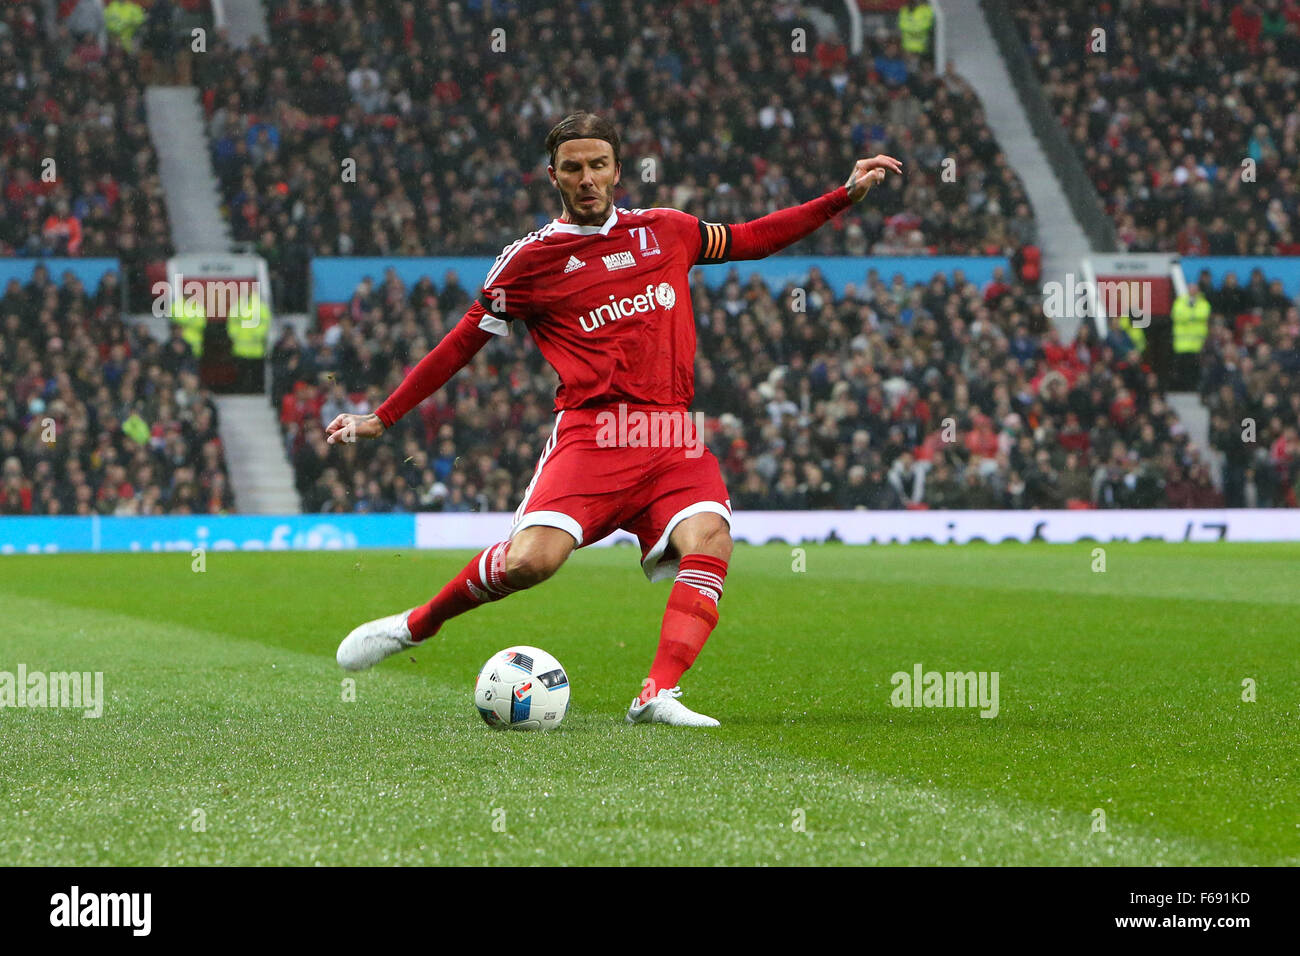 Old Trafford, Manchester, UK. 14th Nov, 2015. Unicef Match for Children. GB and NI XI versus Rest of the World XI. David Beckham crosses in the first half Credit:  Action Plus Sports/Alamy Live News Stock Photo